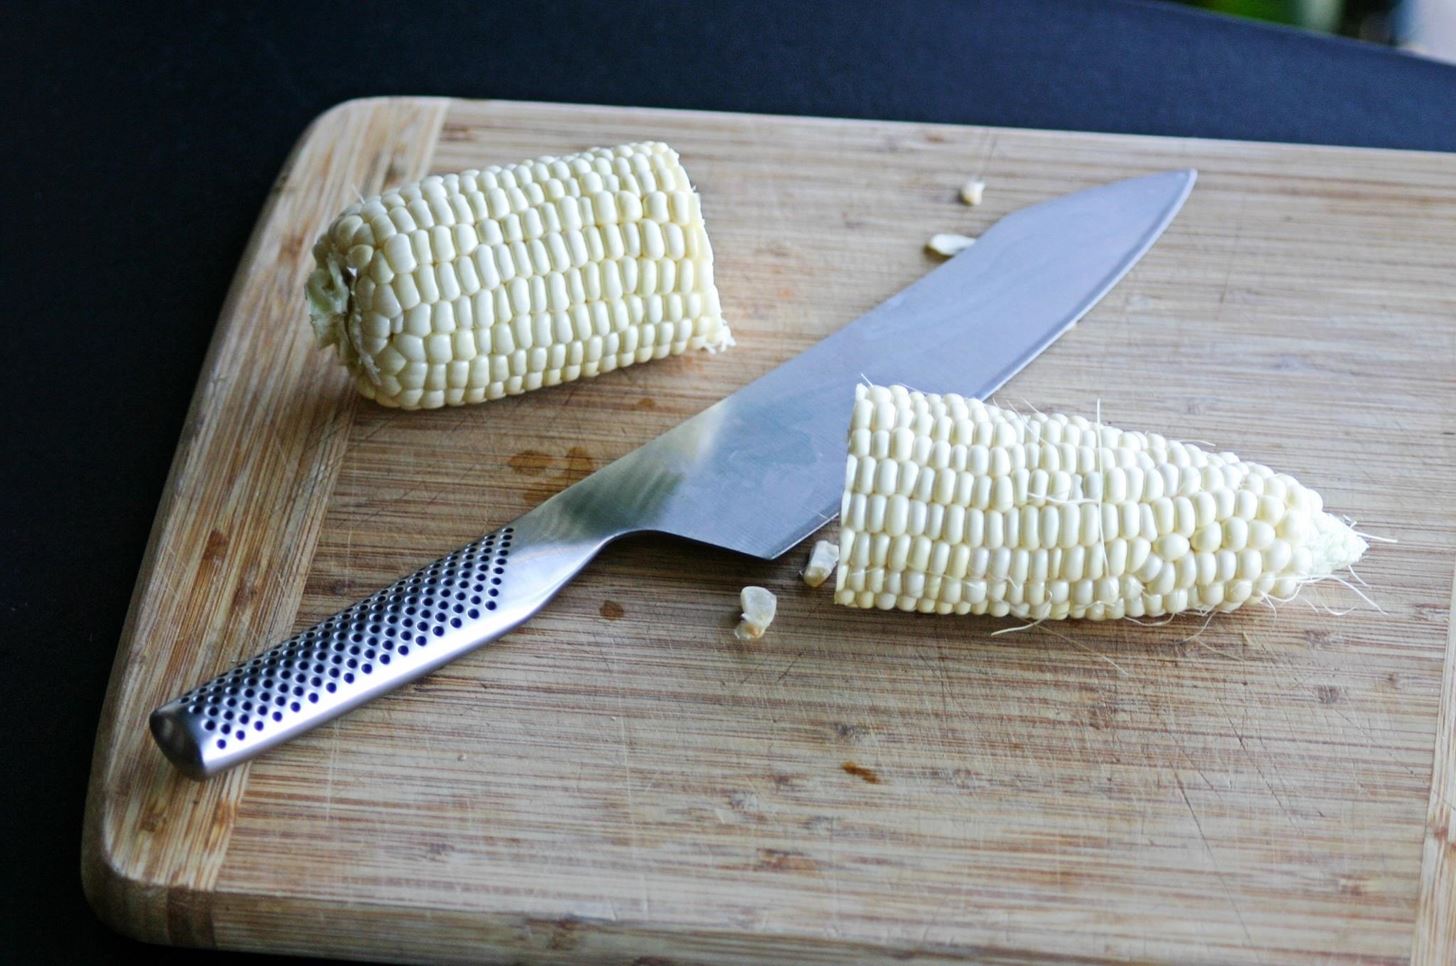 How to Cut Corn Off the Cob Easily, Quickly, & Safely